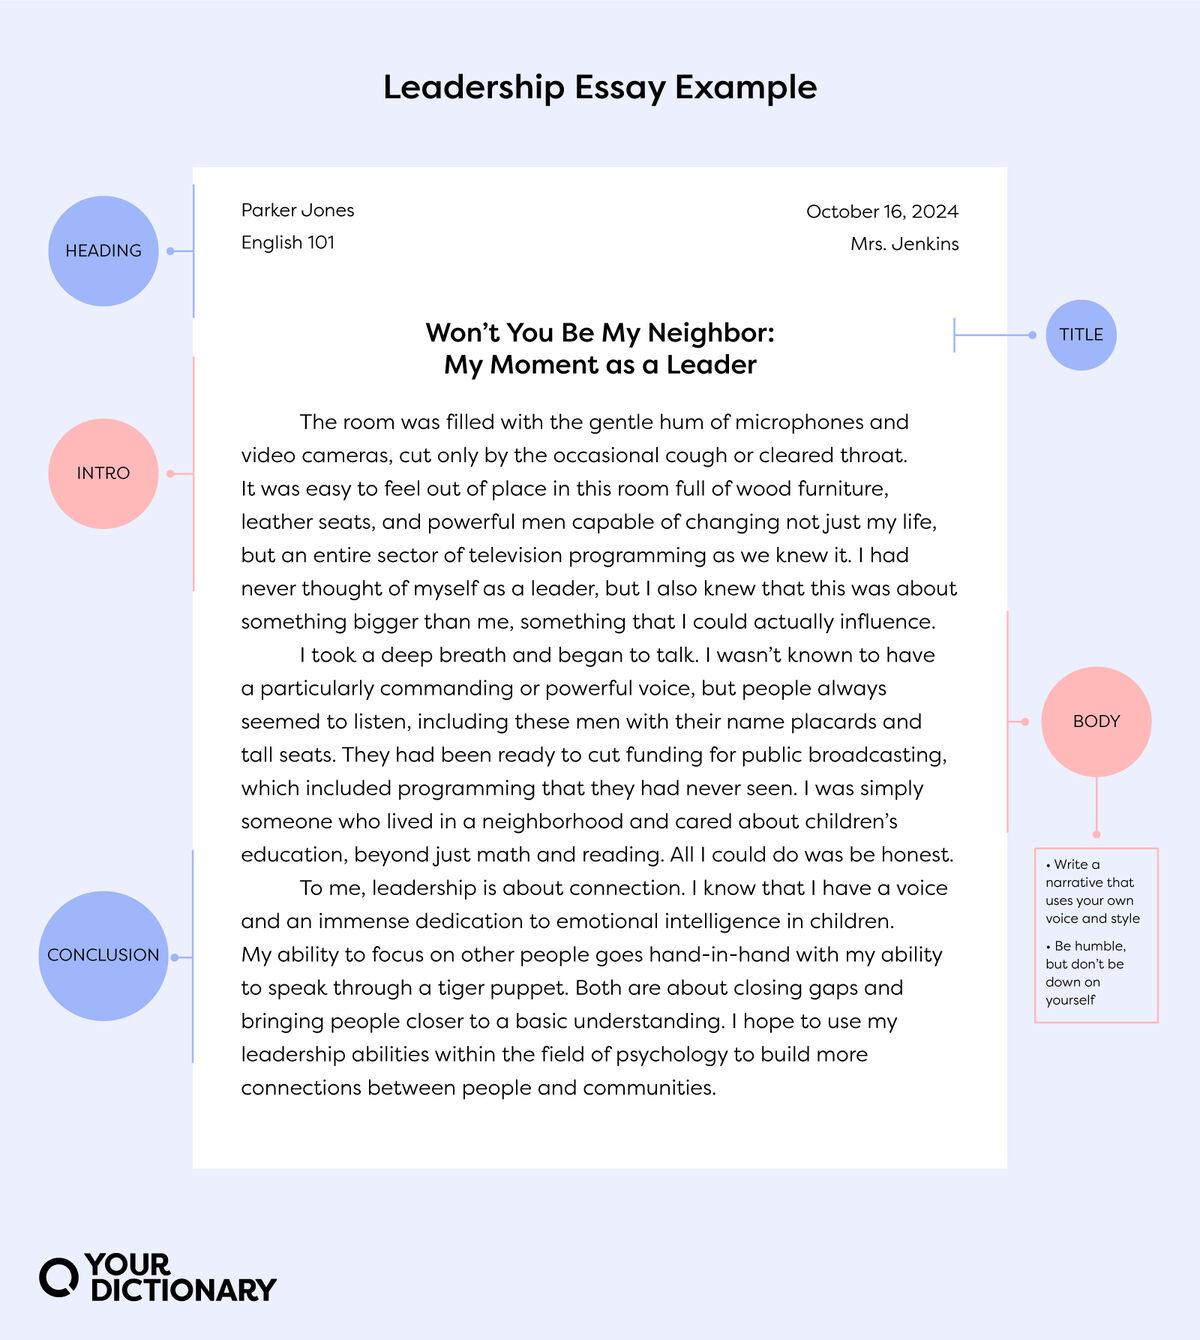 full text essay example with labeled parts restated from the article